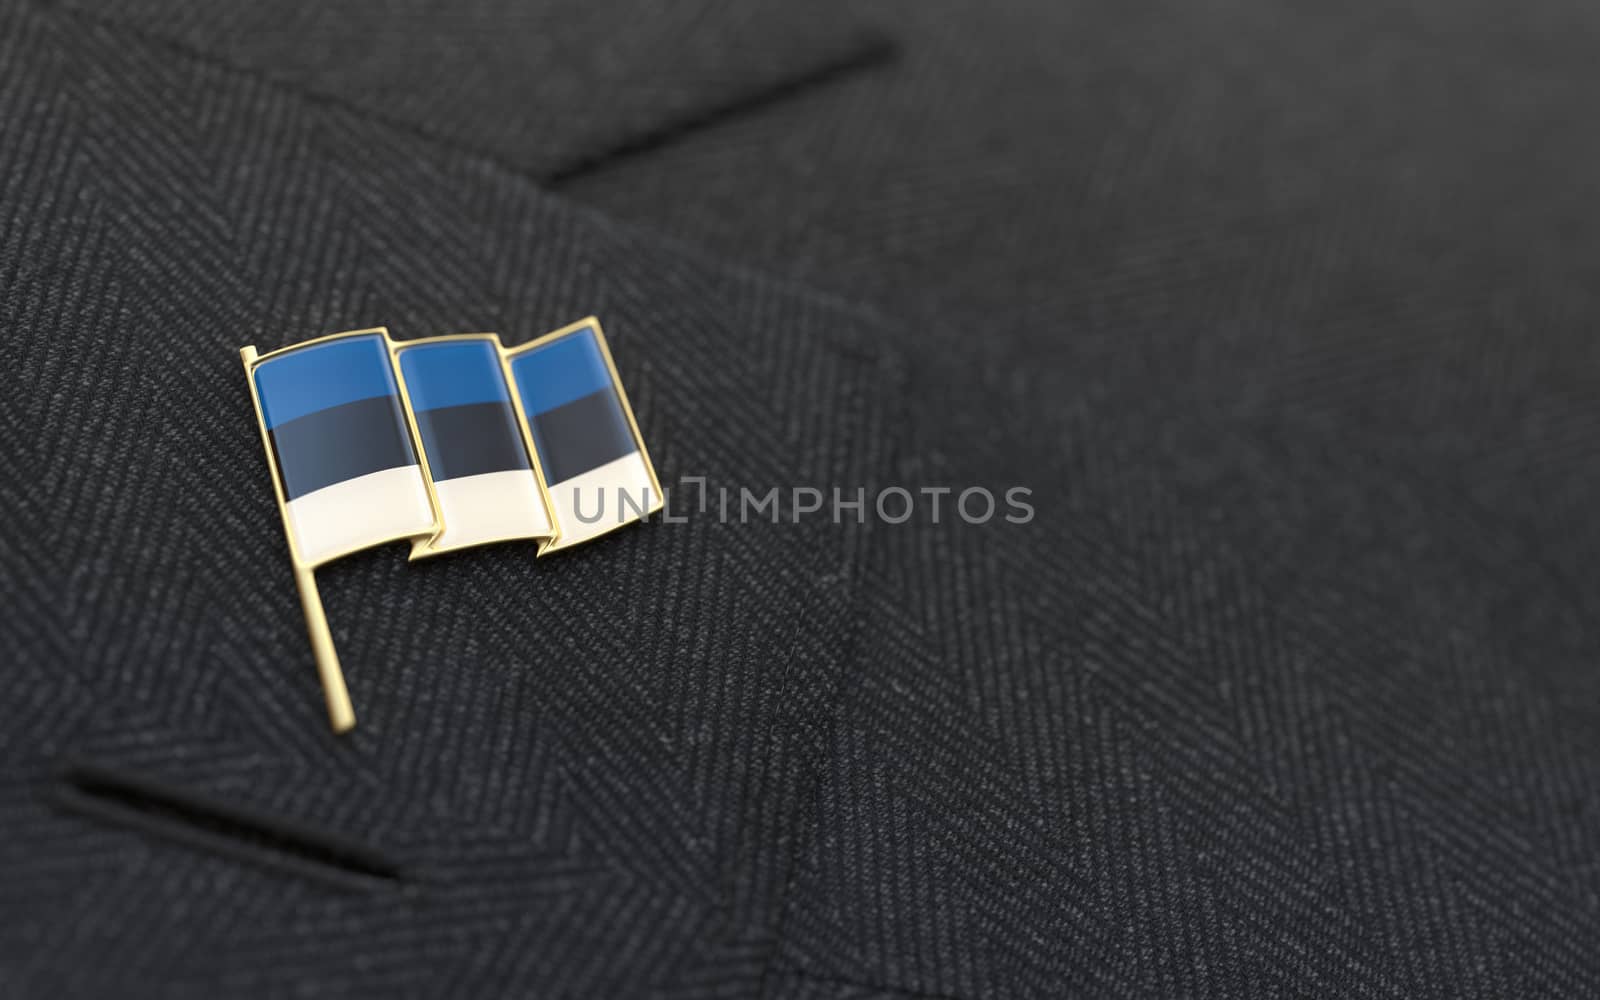 Estonia flag lapel pin on the collar of a business suit jacket shows patriotism